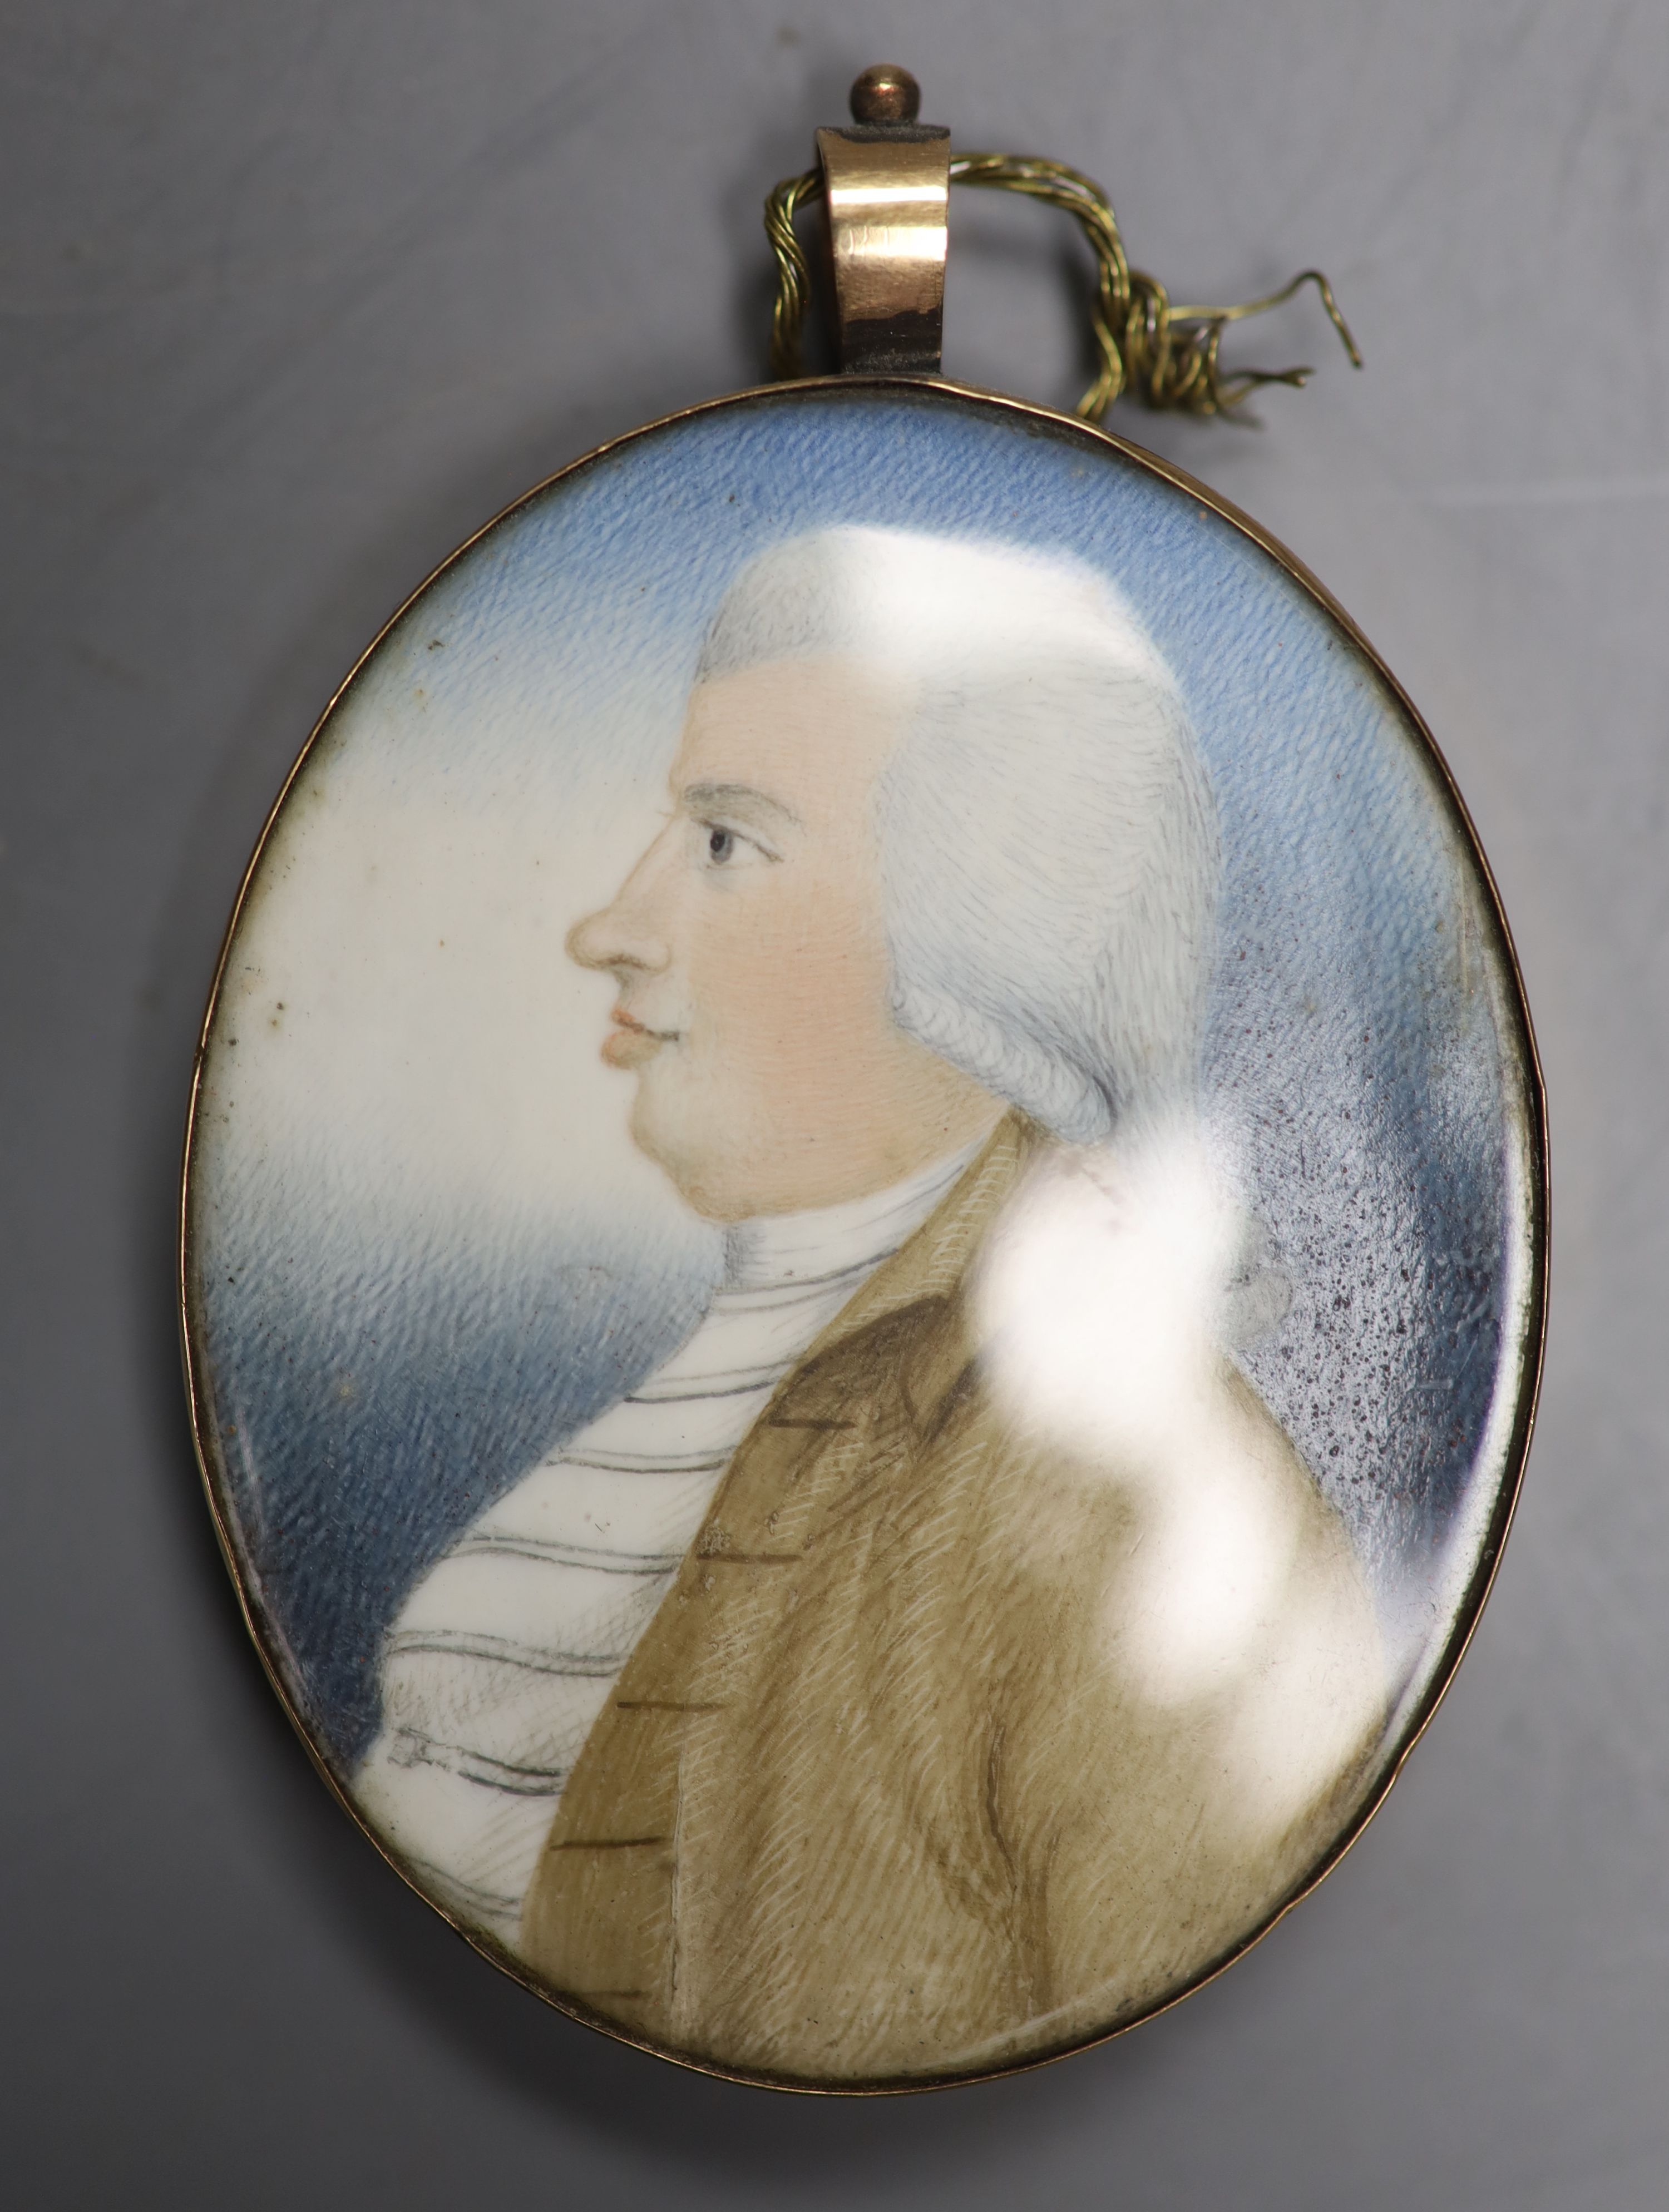 English School (early 19th century), watercolour on ivory, miniature profile portrait of a gentleman